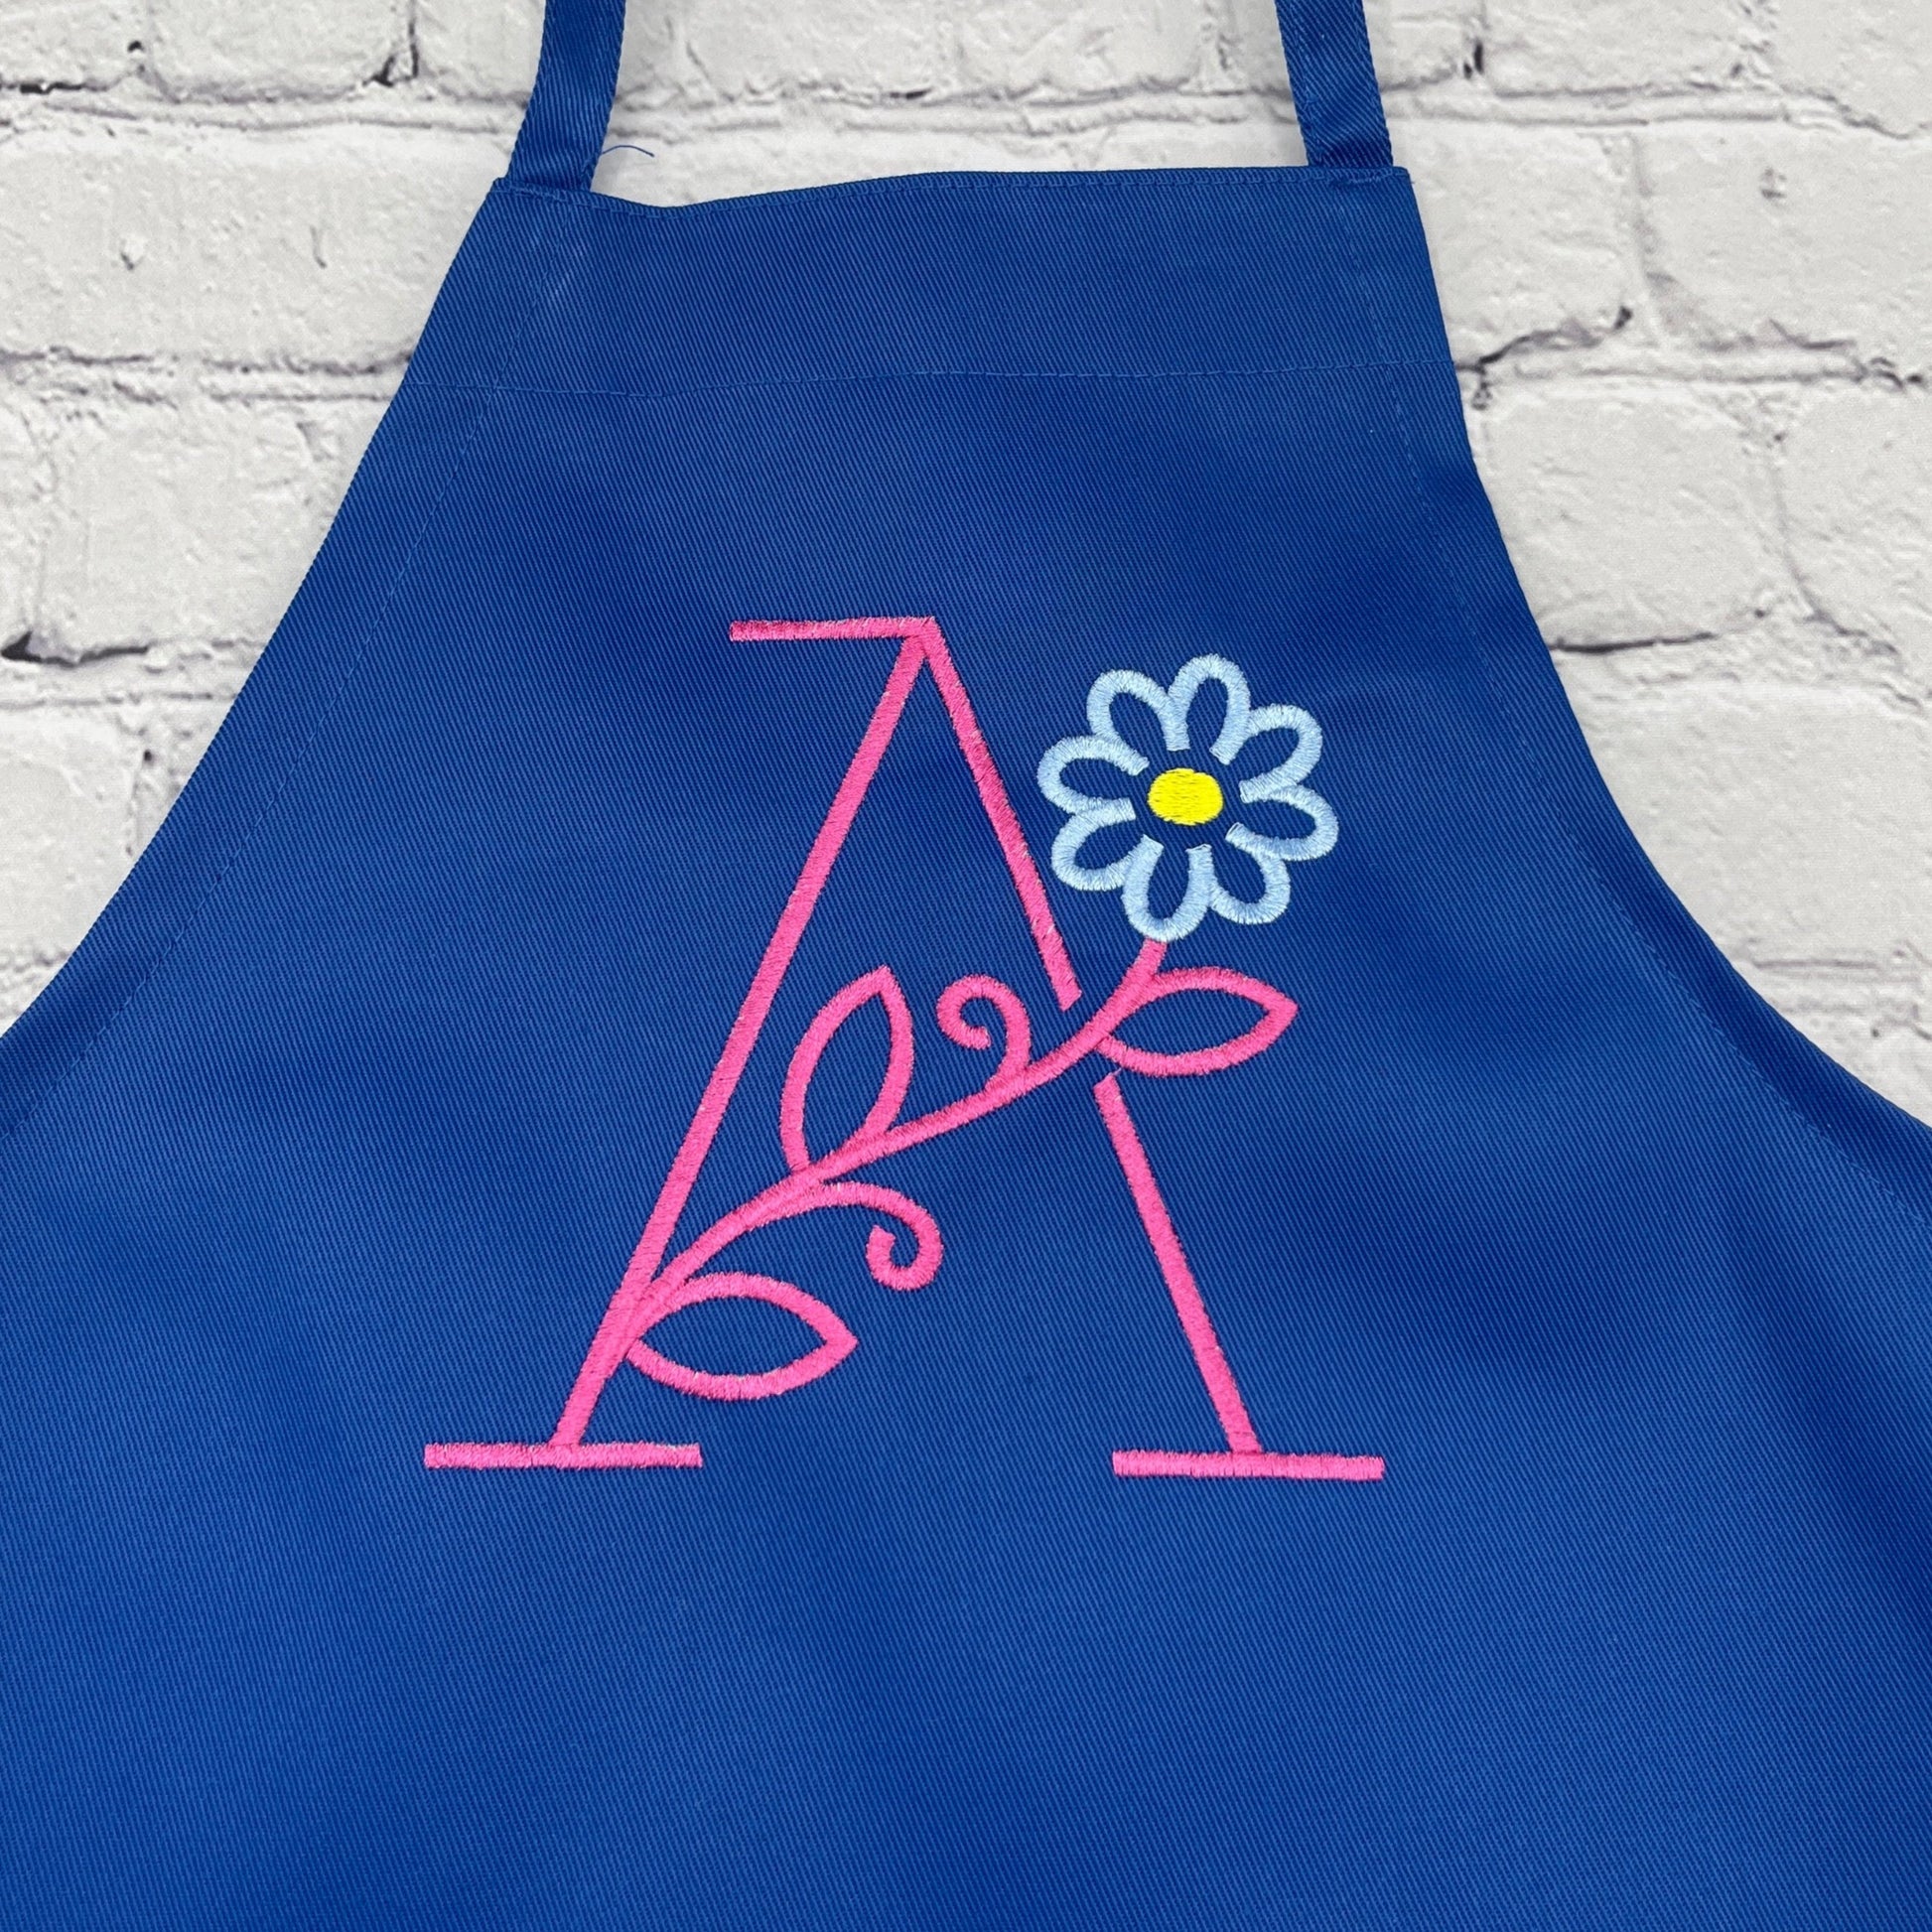 Girls embroidered apron with large initial and flower royal blue apron